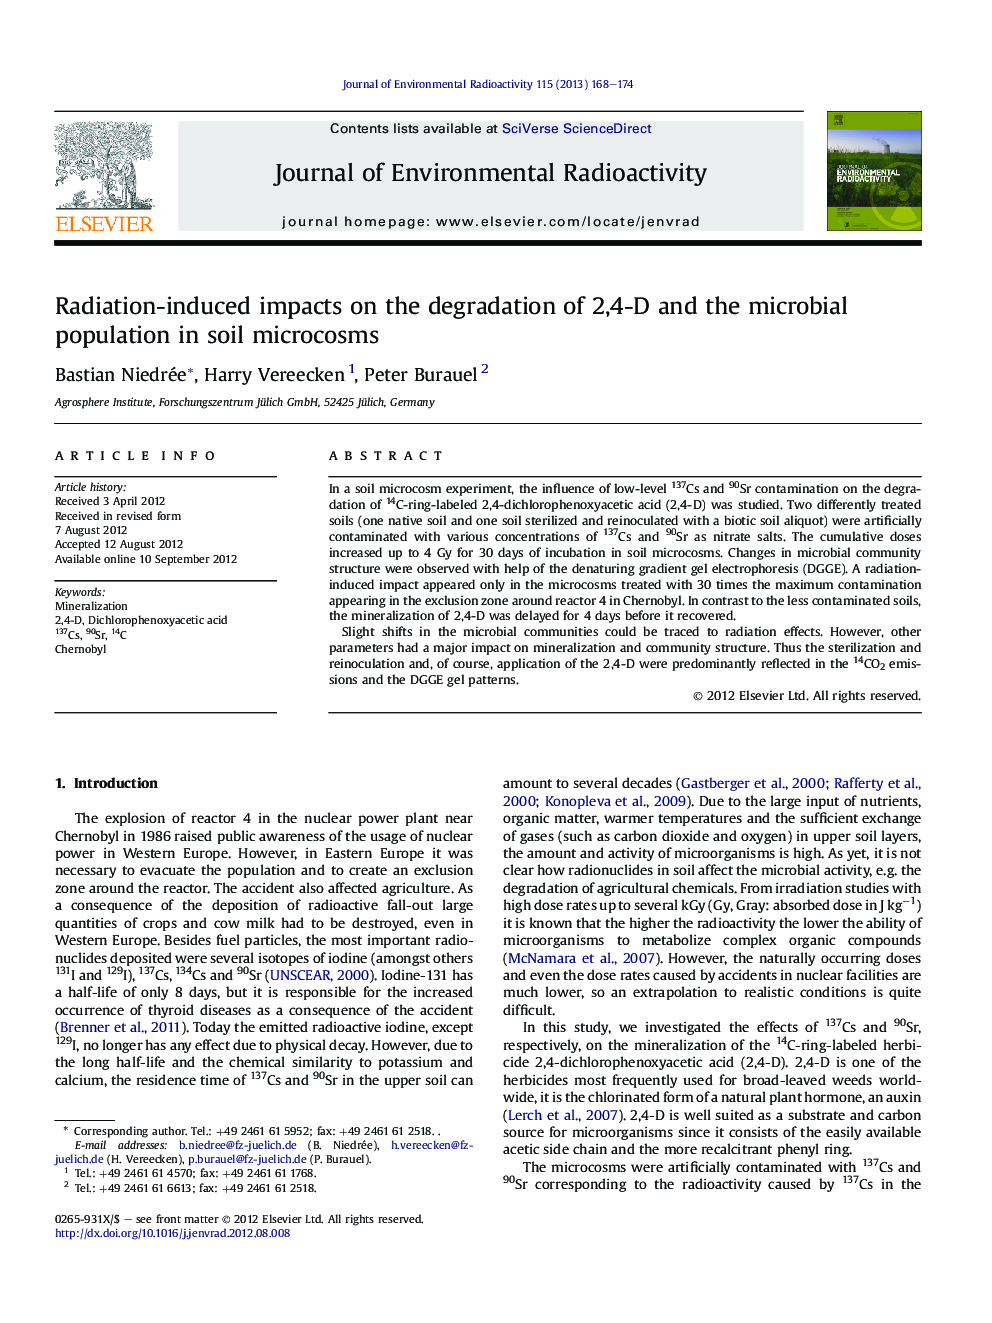 Radiation-induced impacts on the degradation of 2,4-D and the microbial population in soil microcosms